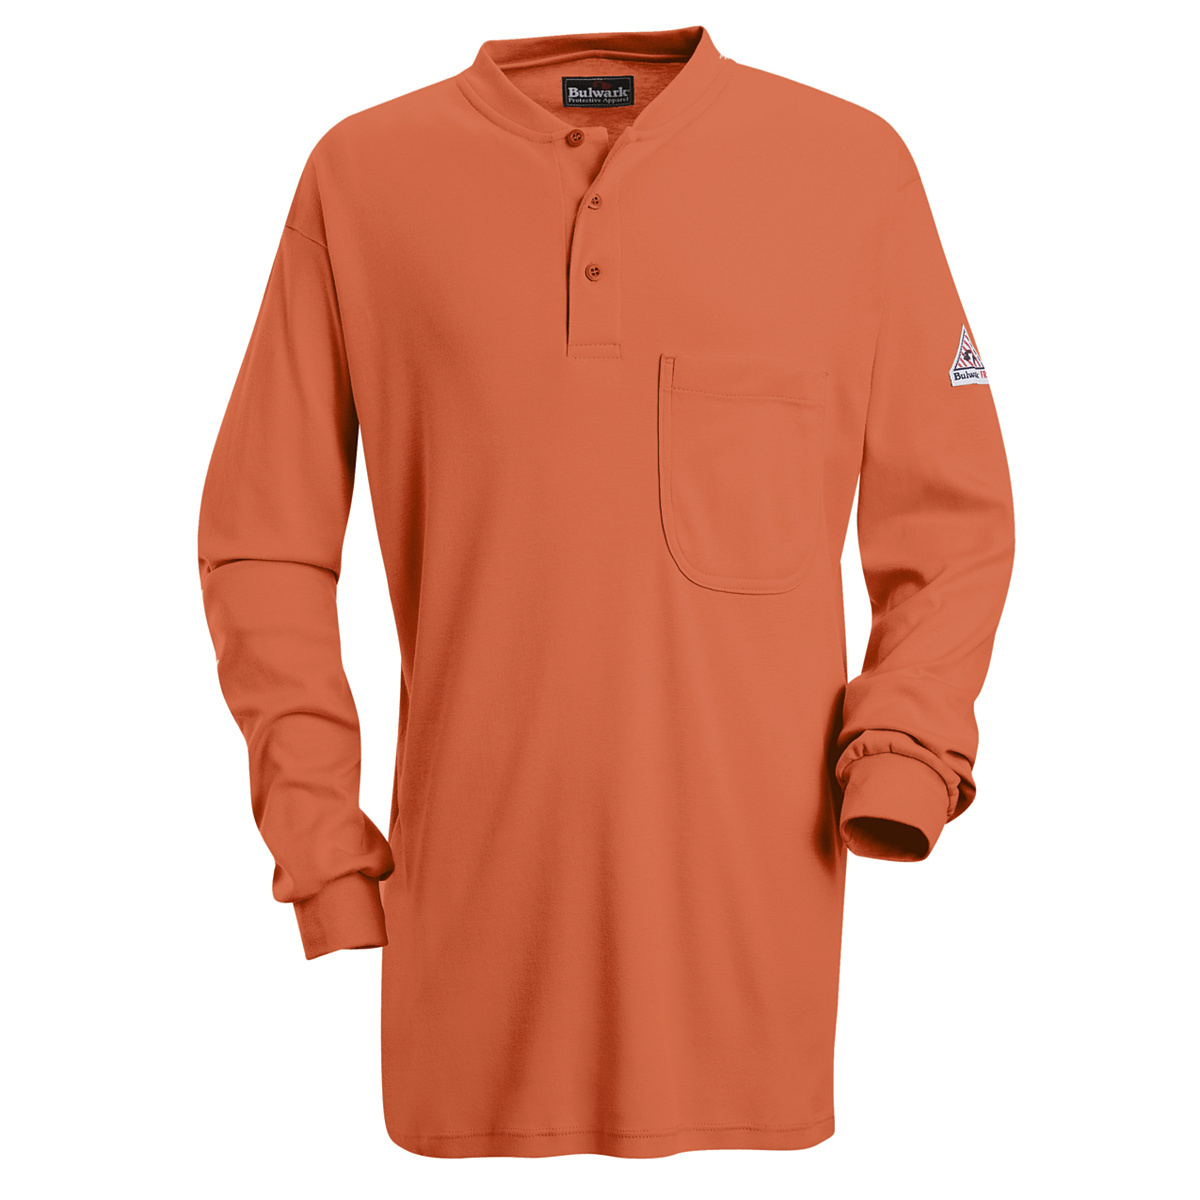 Bulwark® X-Large Tall Orange EXCEL FR® Interlock FR Cotton Flame Resistant Henley Shirt With Button Front Closure